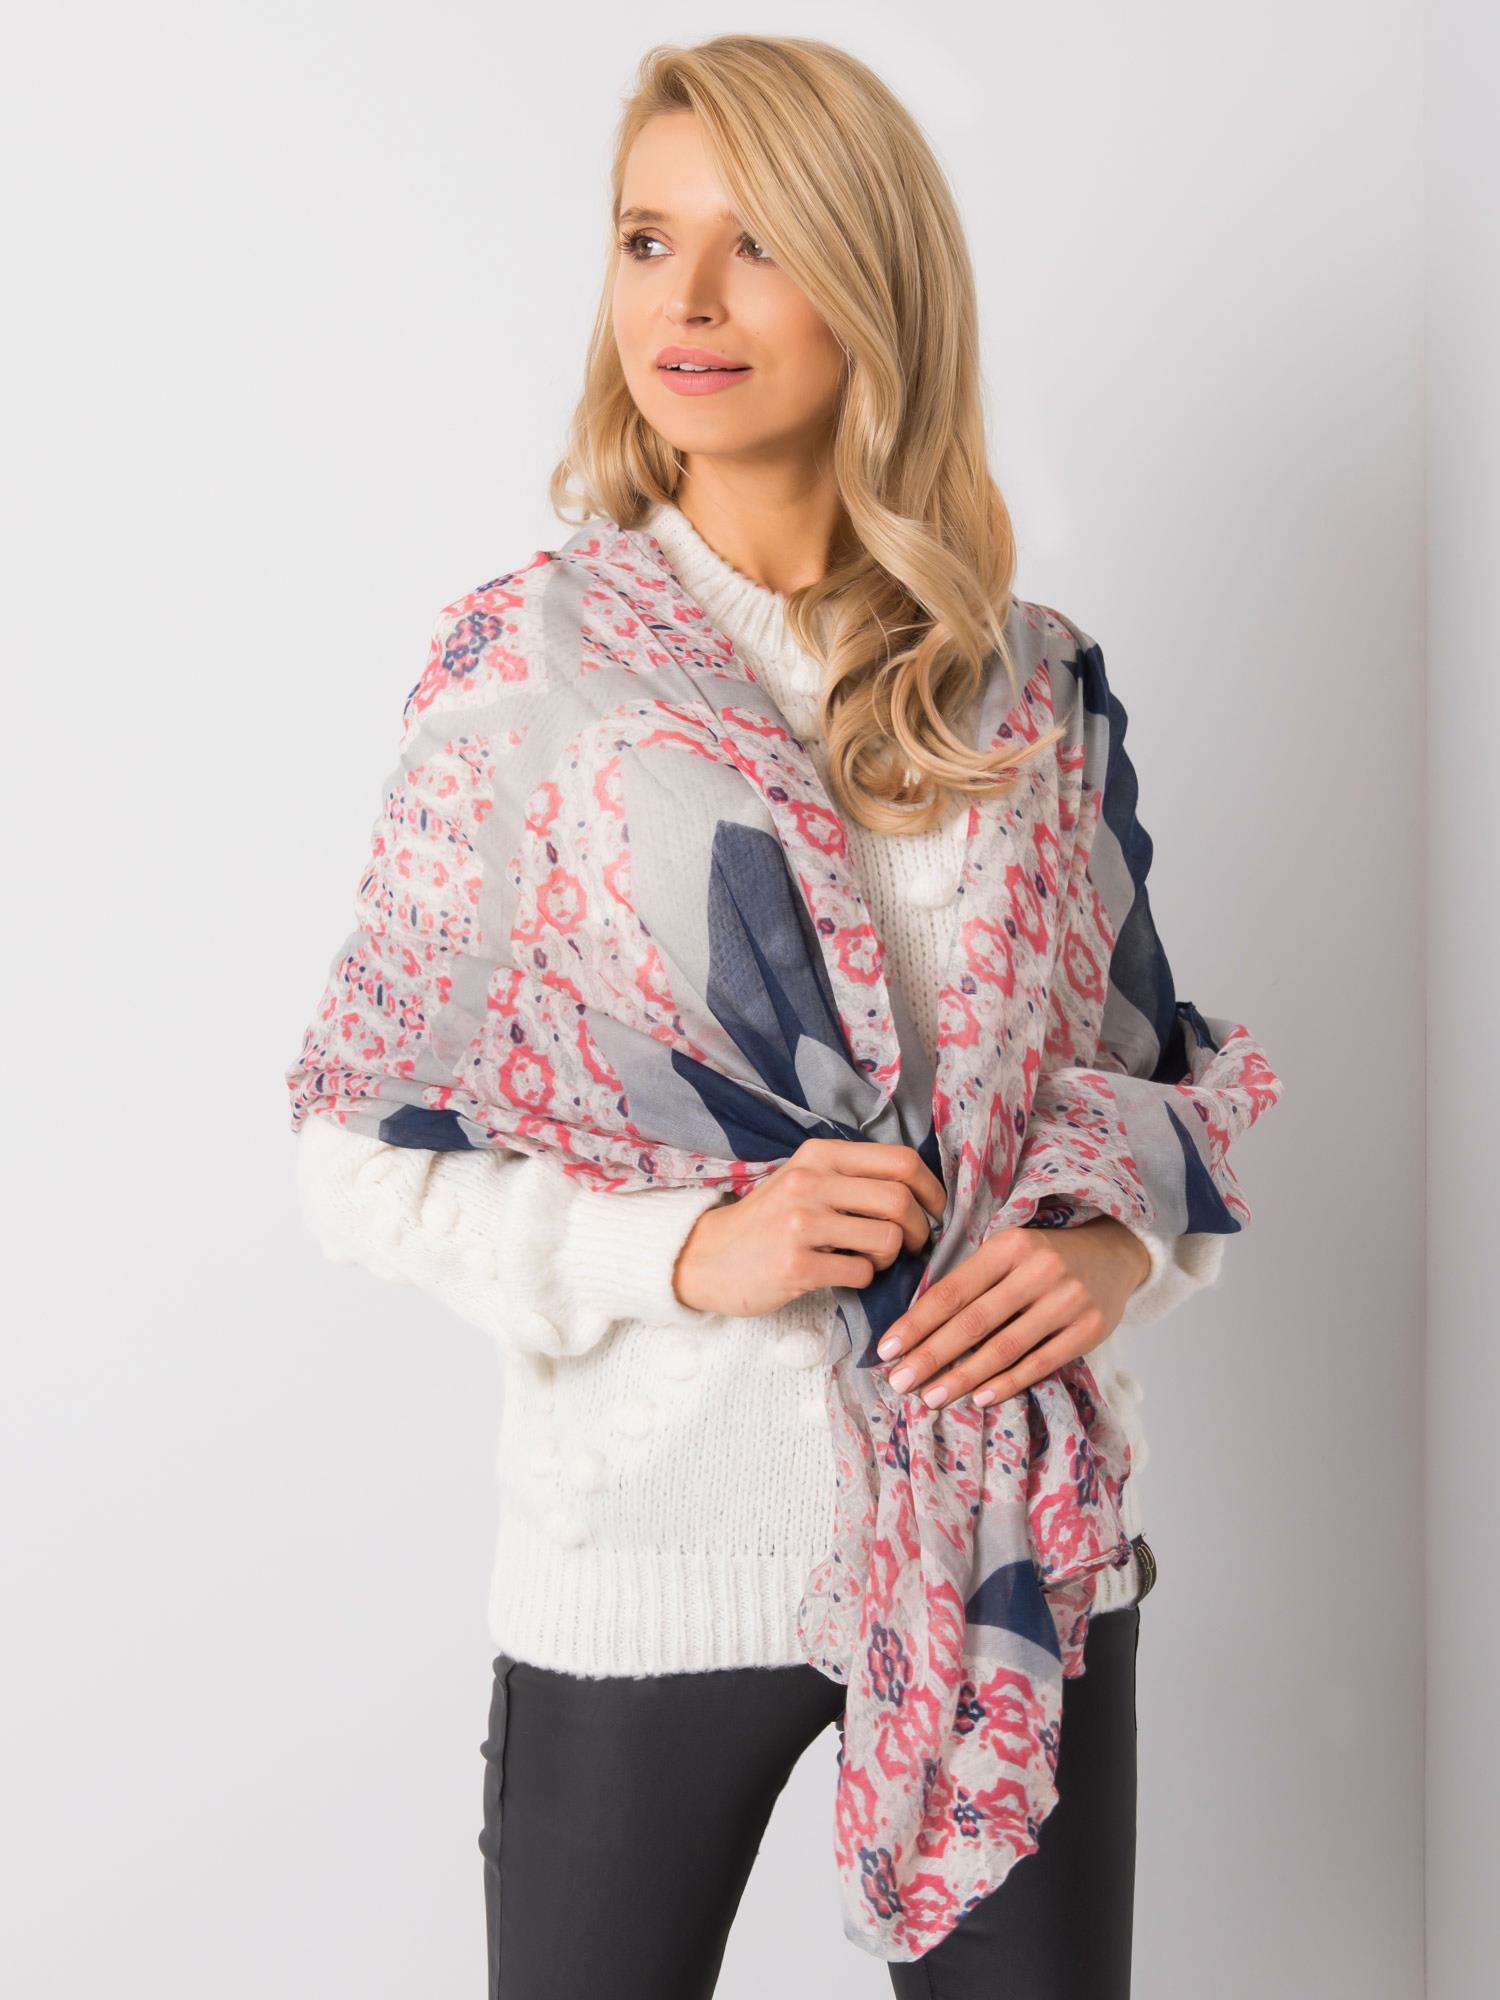 Grey and pink patterned shawl